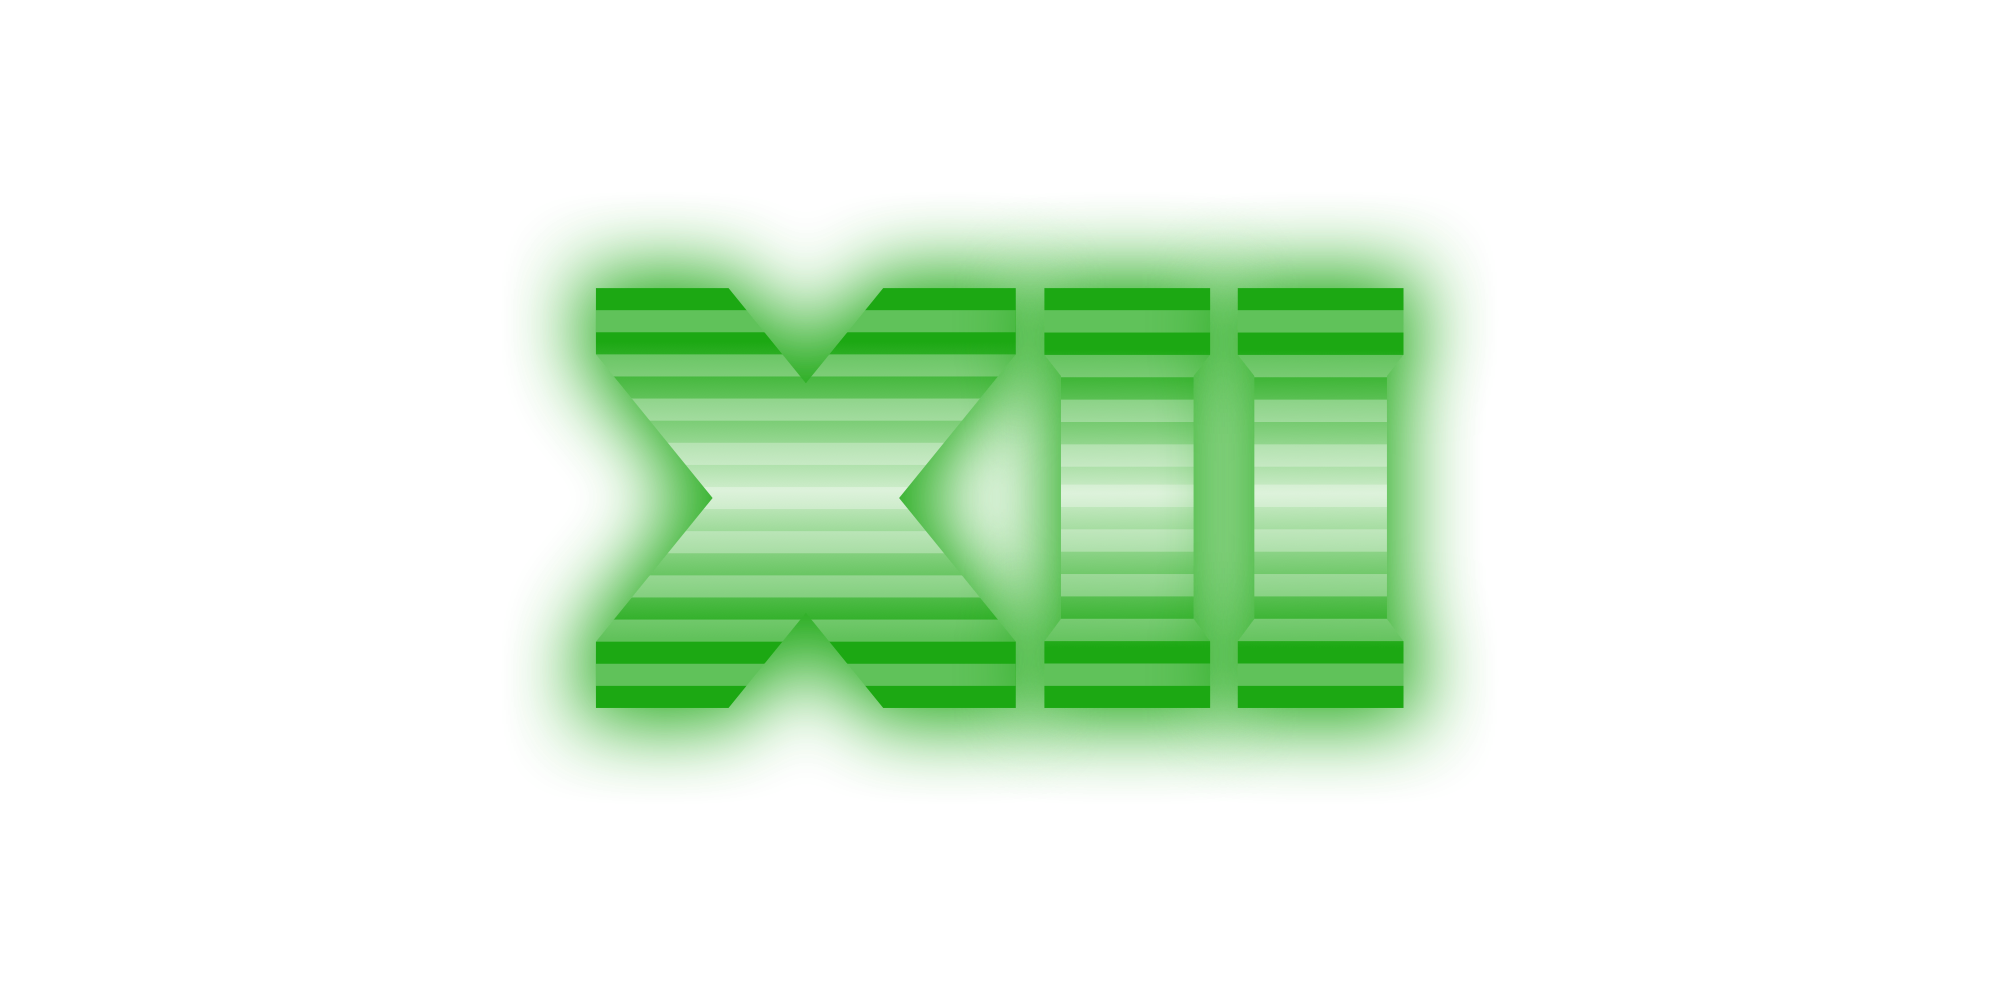 Directx 12 Ultimate Game Ready Driver Released Also Includes